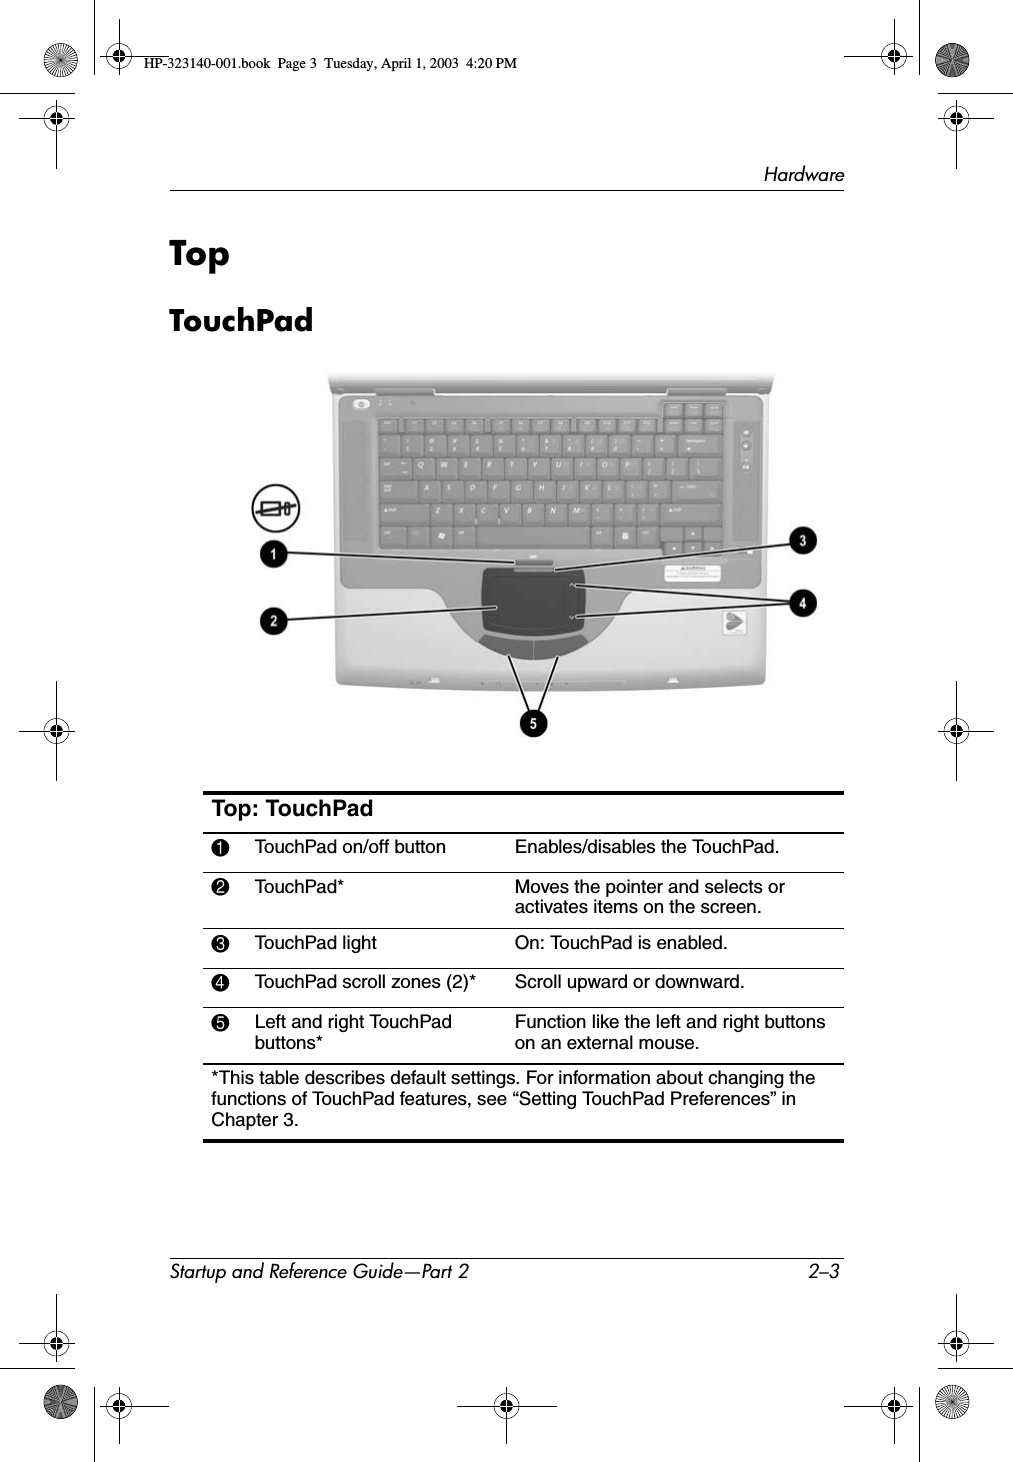 HardwareStartup and Reference Guide—Part 2 2–3TopTouchPadTop: TouchPad1TouchPad on/off button Enables/disables the TouchPad.2TouchPad* Moves the pointer and selects or activates items on the screen.3TouchPad light On: TouchPad is enabled.4TouchPad scroll zones (2)* Scroll upward or downward. 5Left and right TouchPad buttons*Function like the left and right buttons on an external mouse.*This table describes default settings. For information about changing the functions of TouchPad features, see “Setting TouchPad Preferences” in Chapter 3.HP-323140-001.book  Page 3  Tuesday, April 1, 2003  4:20 PM